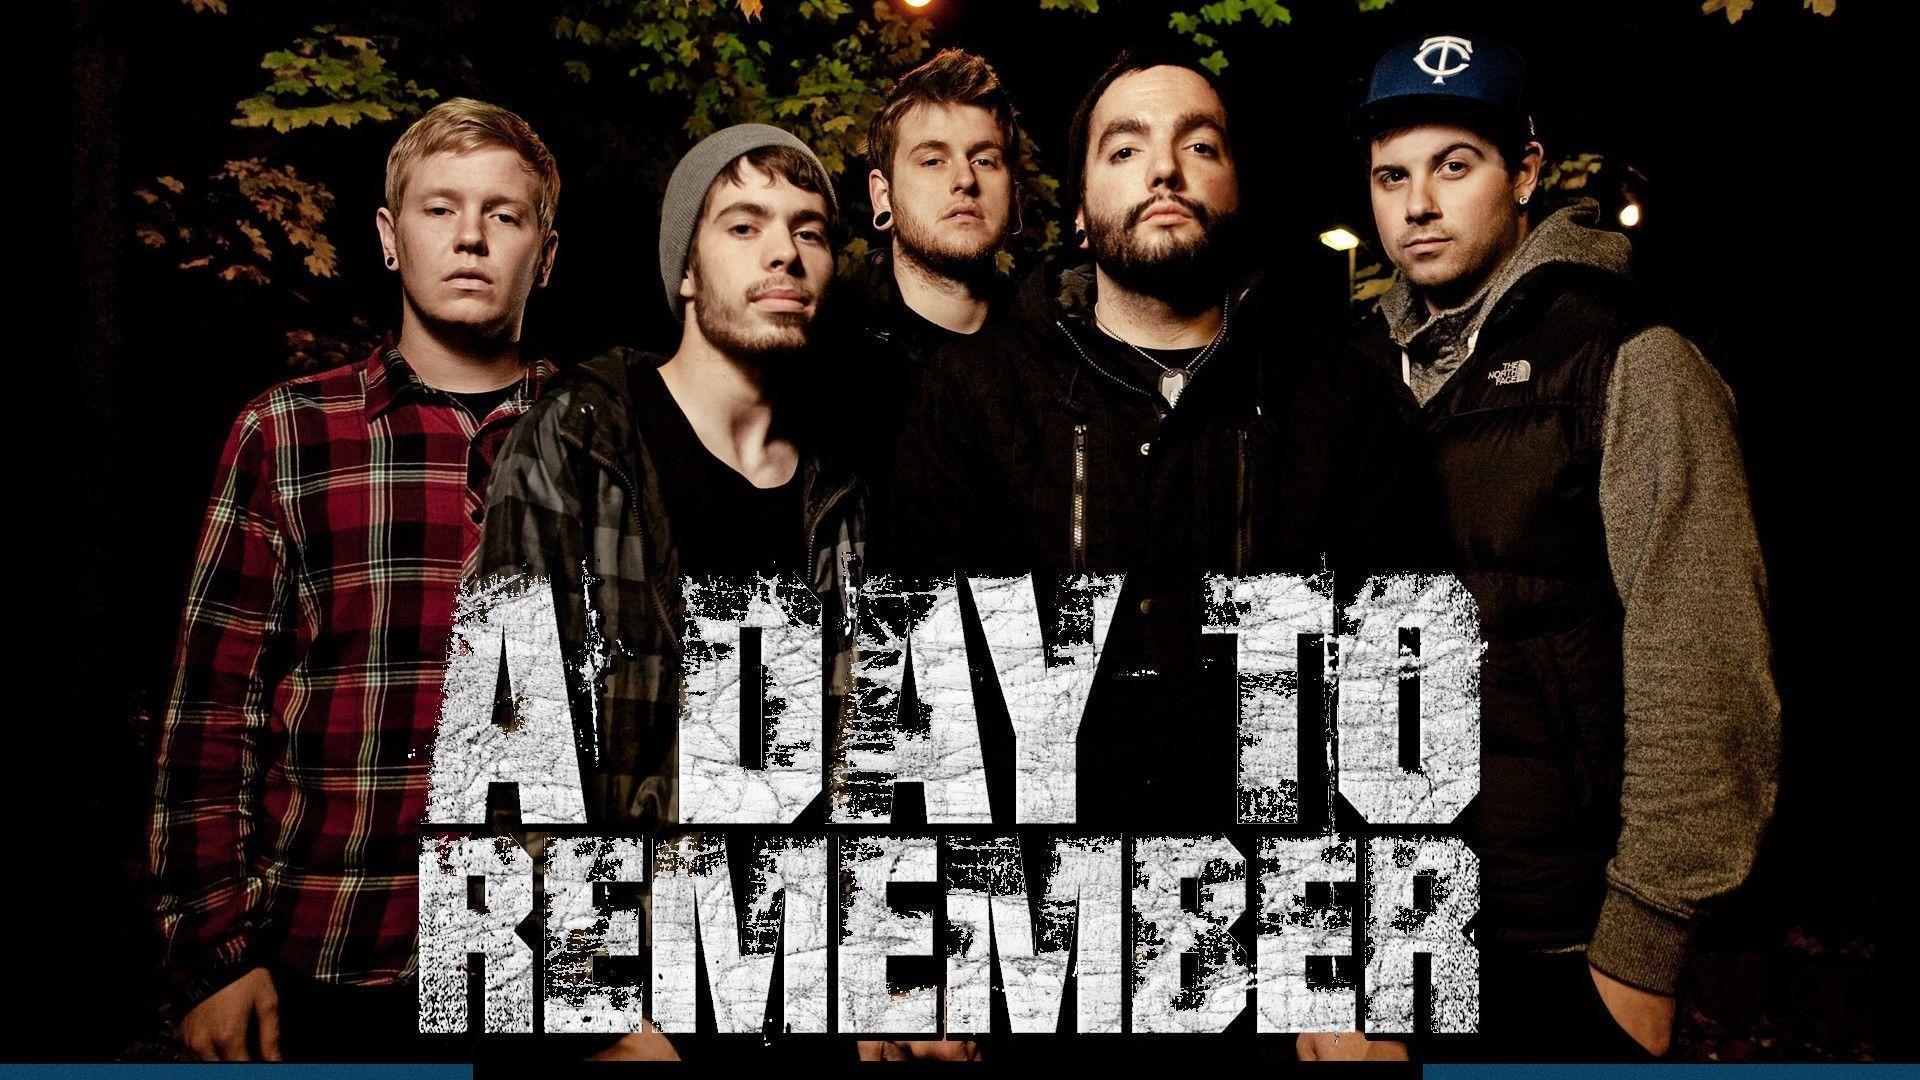 Download A Day To Remember 14900 1920x1080 px High Resolution